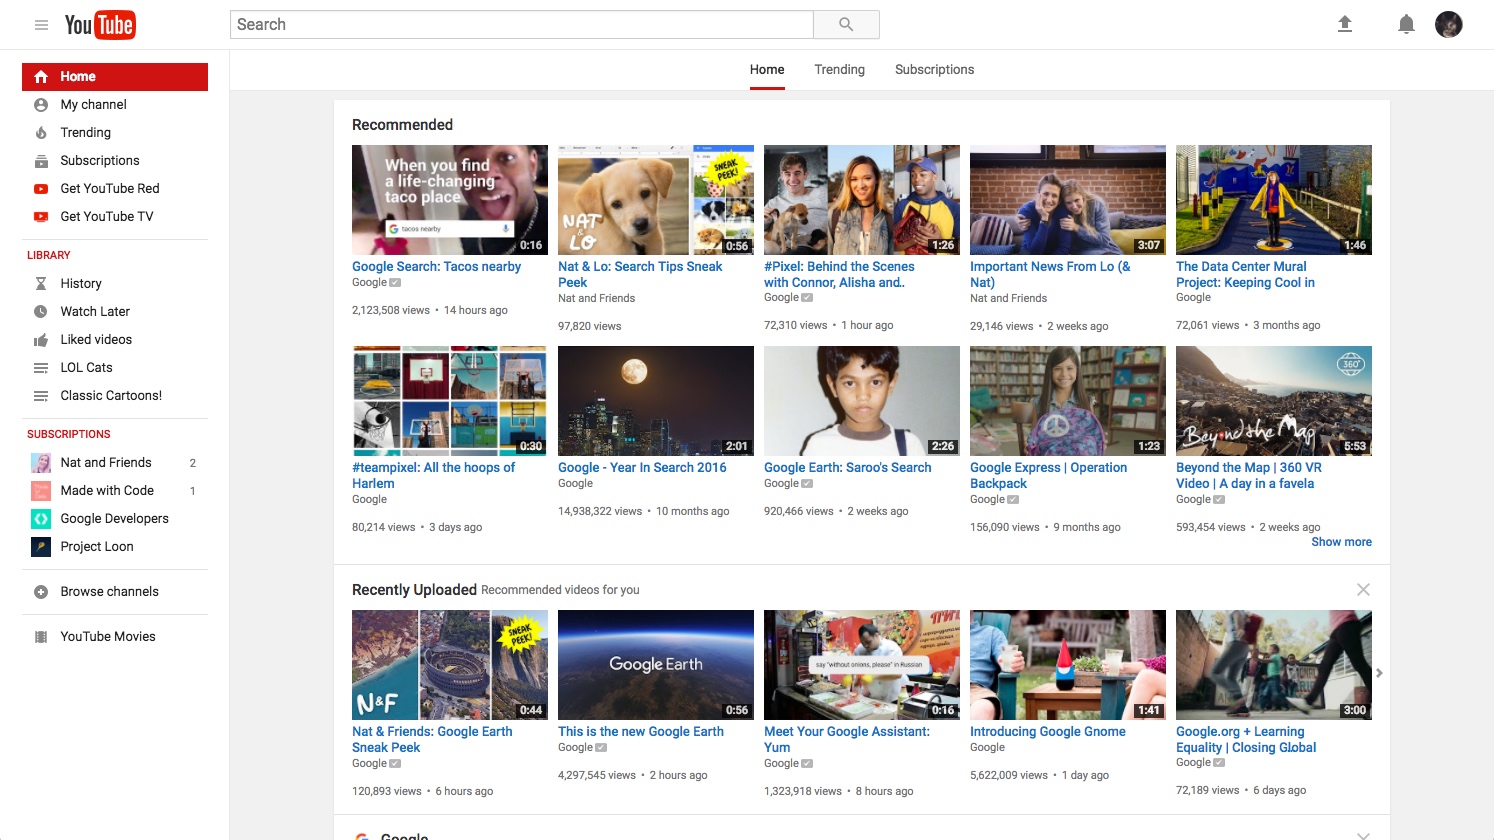 YouTube homepage before redesign (2017)